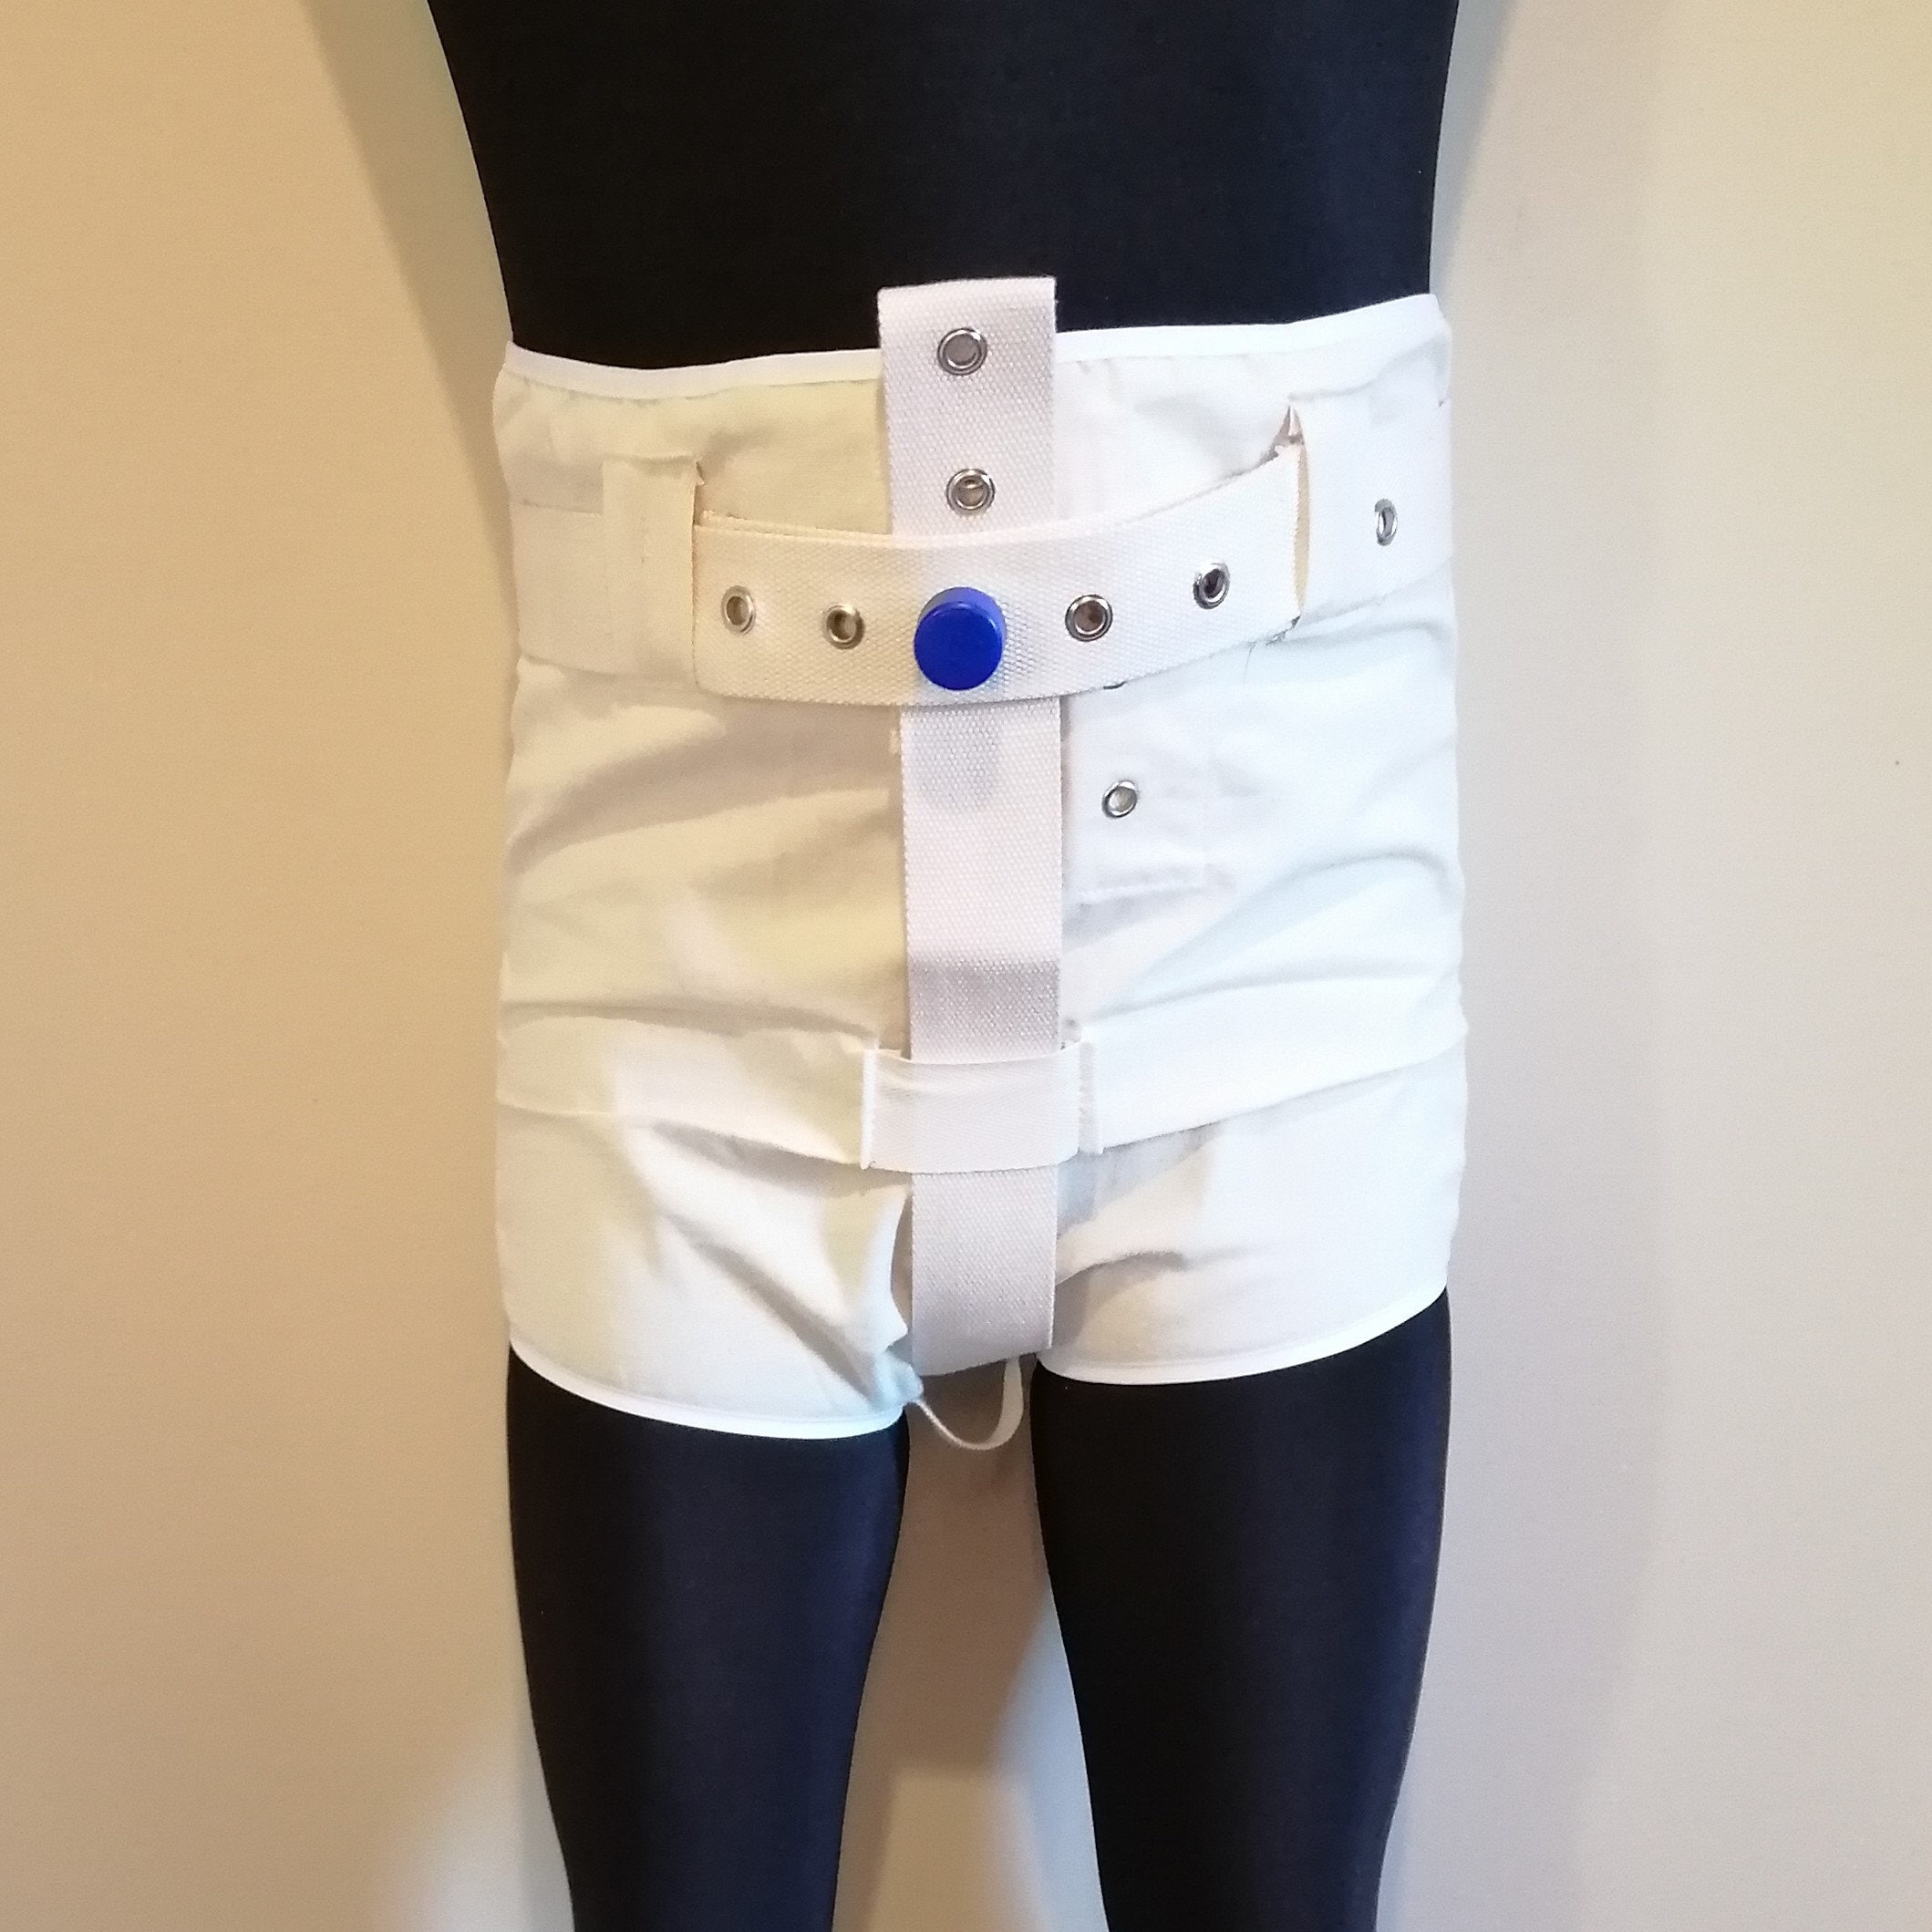 Add On Only Locking Diaper Adult Baby Abdl Segufix Fixx Etsy.